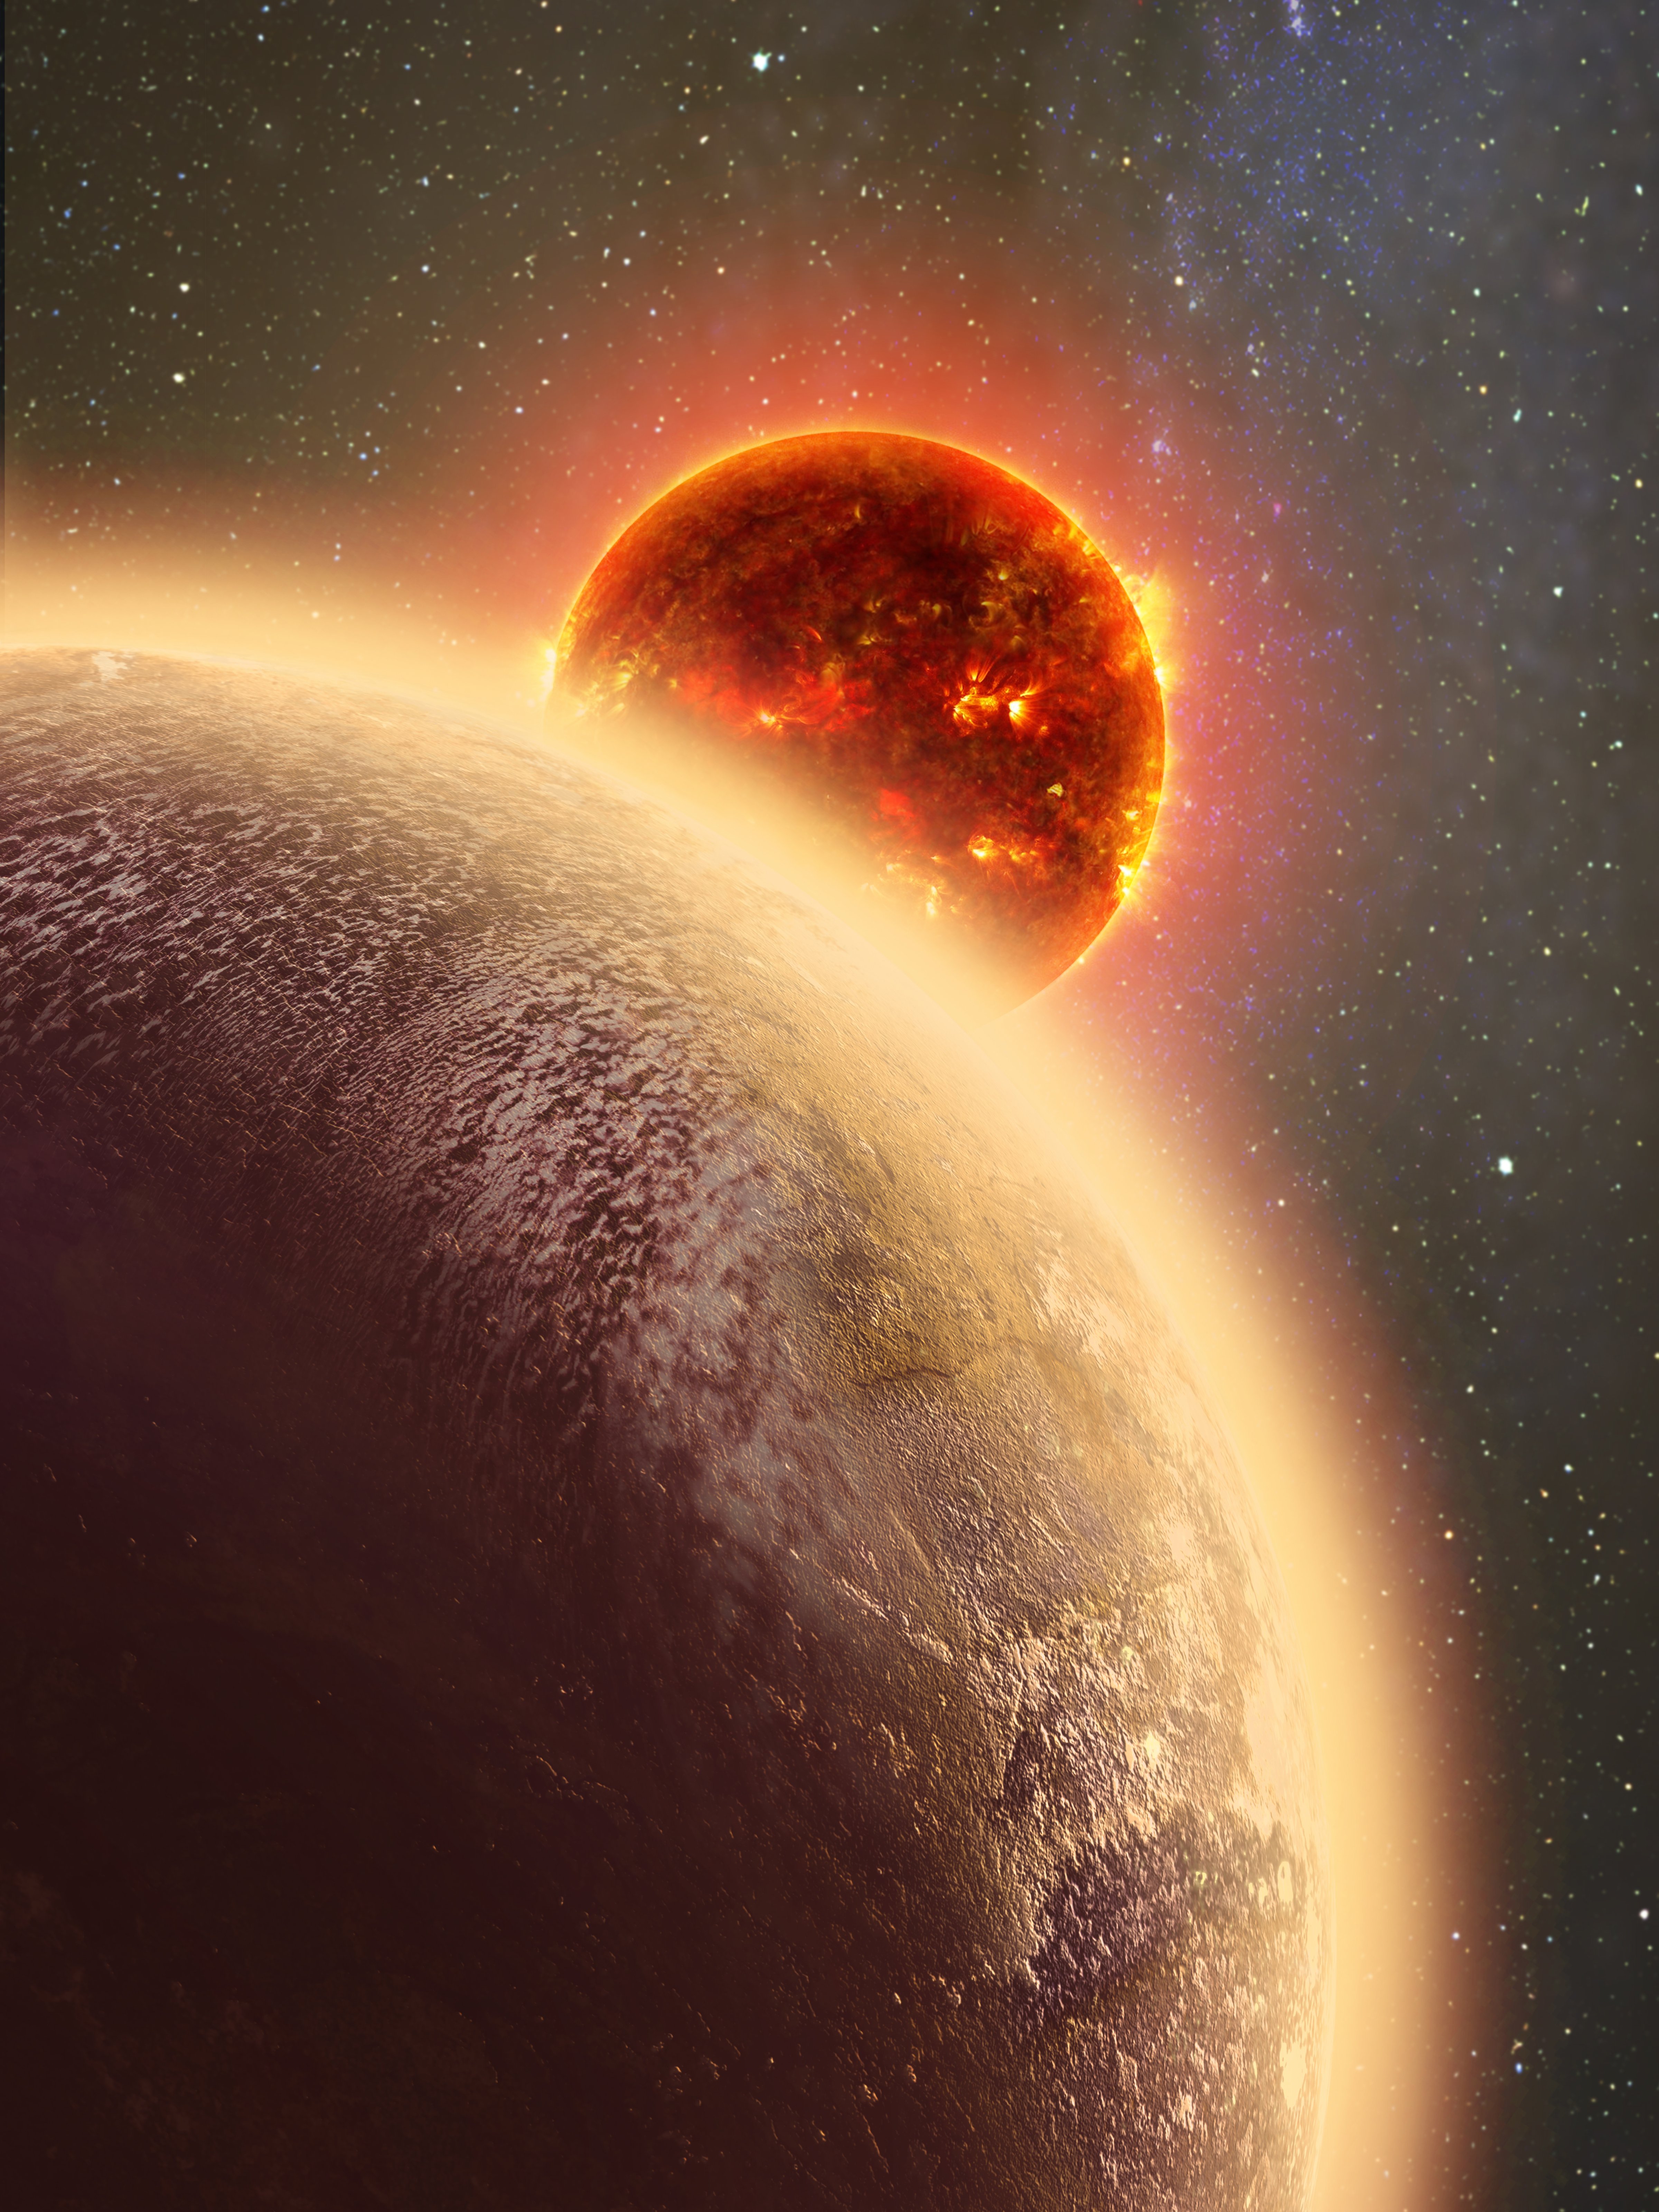 In this artist's conception GJ 1132b, a rocky exoplanet very similar to Earth in size and mass, circles a red dwarf star. (Dana Berry—SkyWorks Digital/Harvard-Smithsonian Center For Astrophyics)